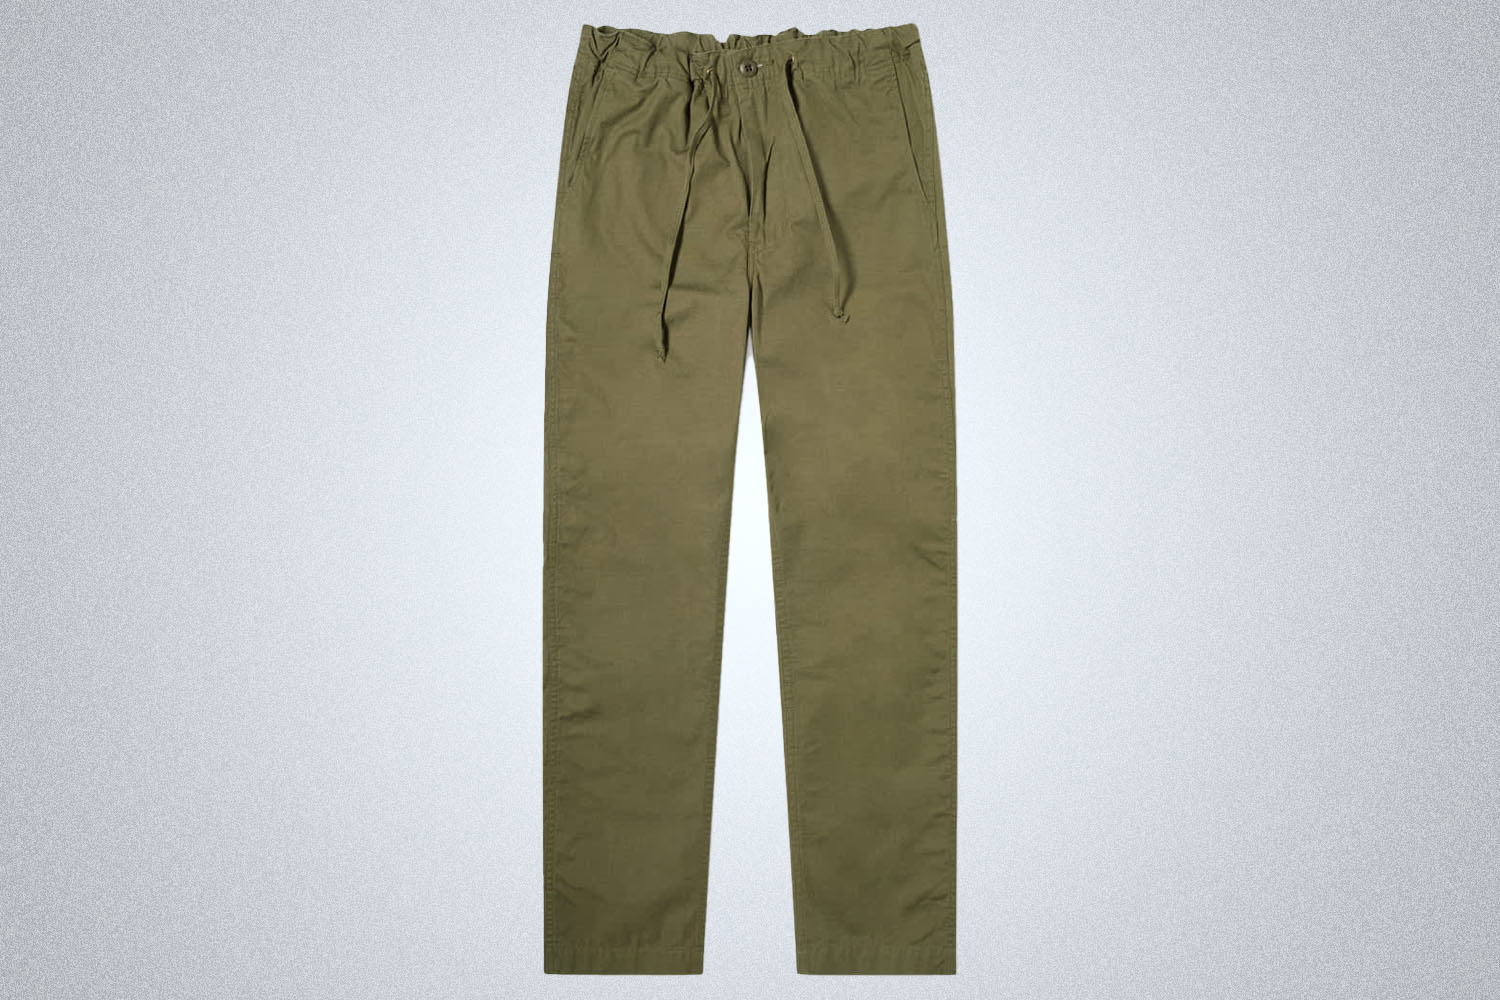 a pair fo chinos on a grey background